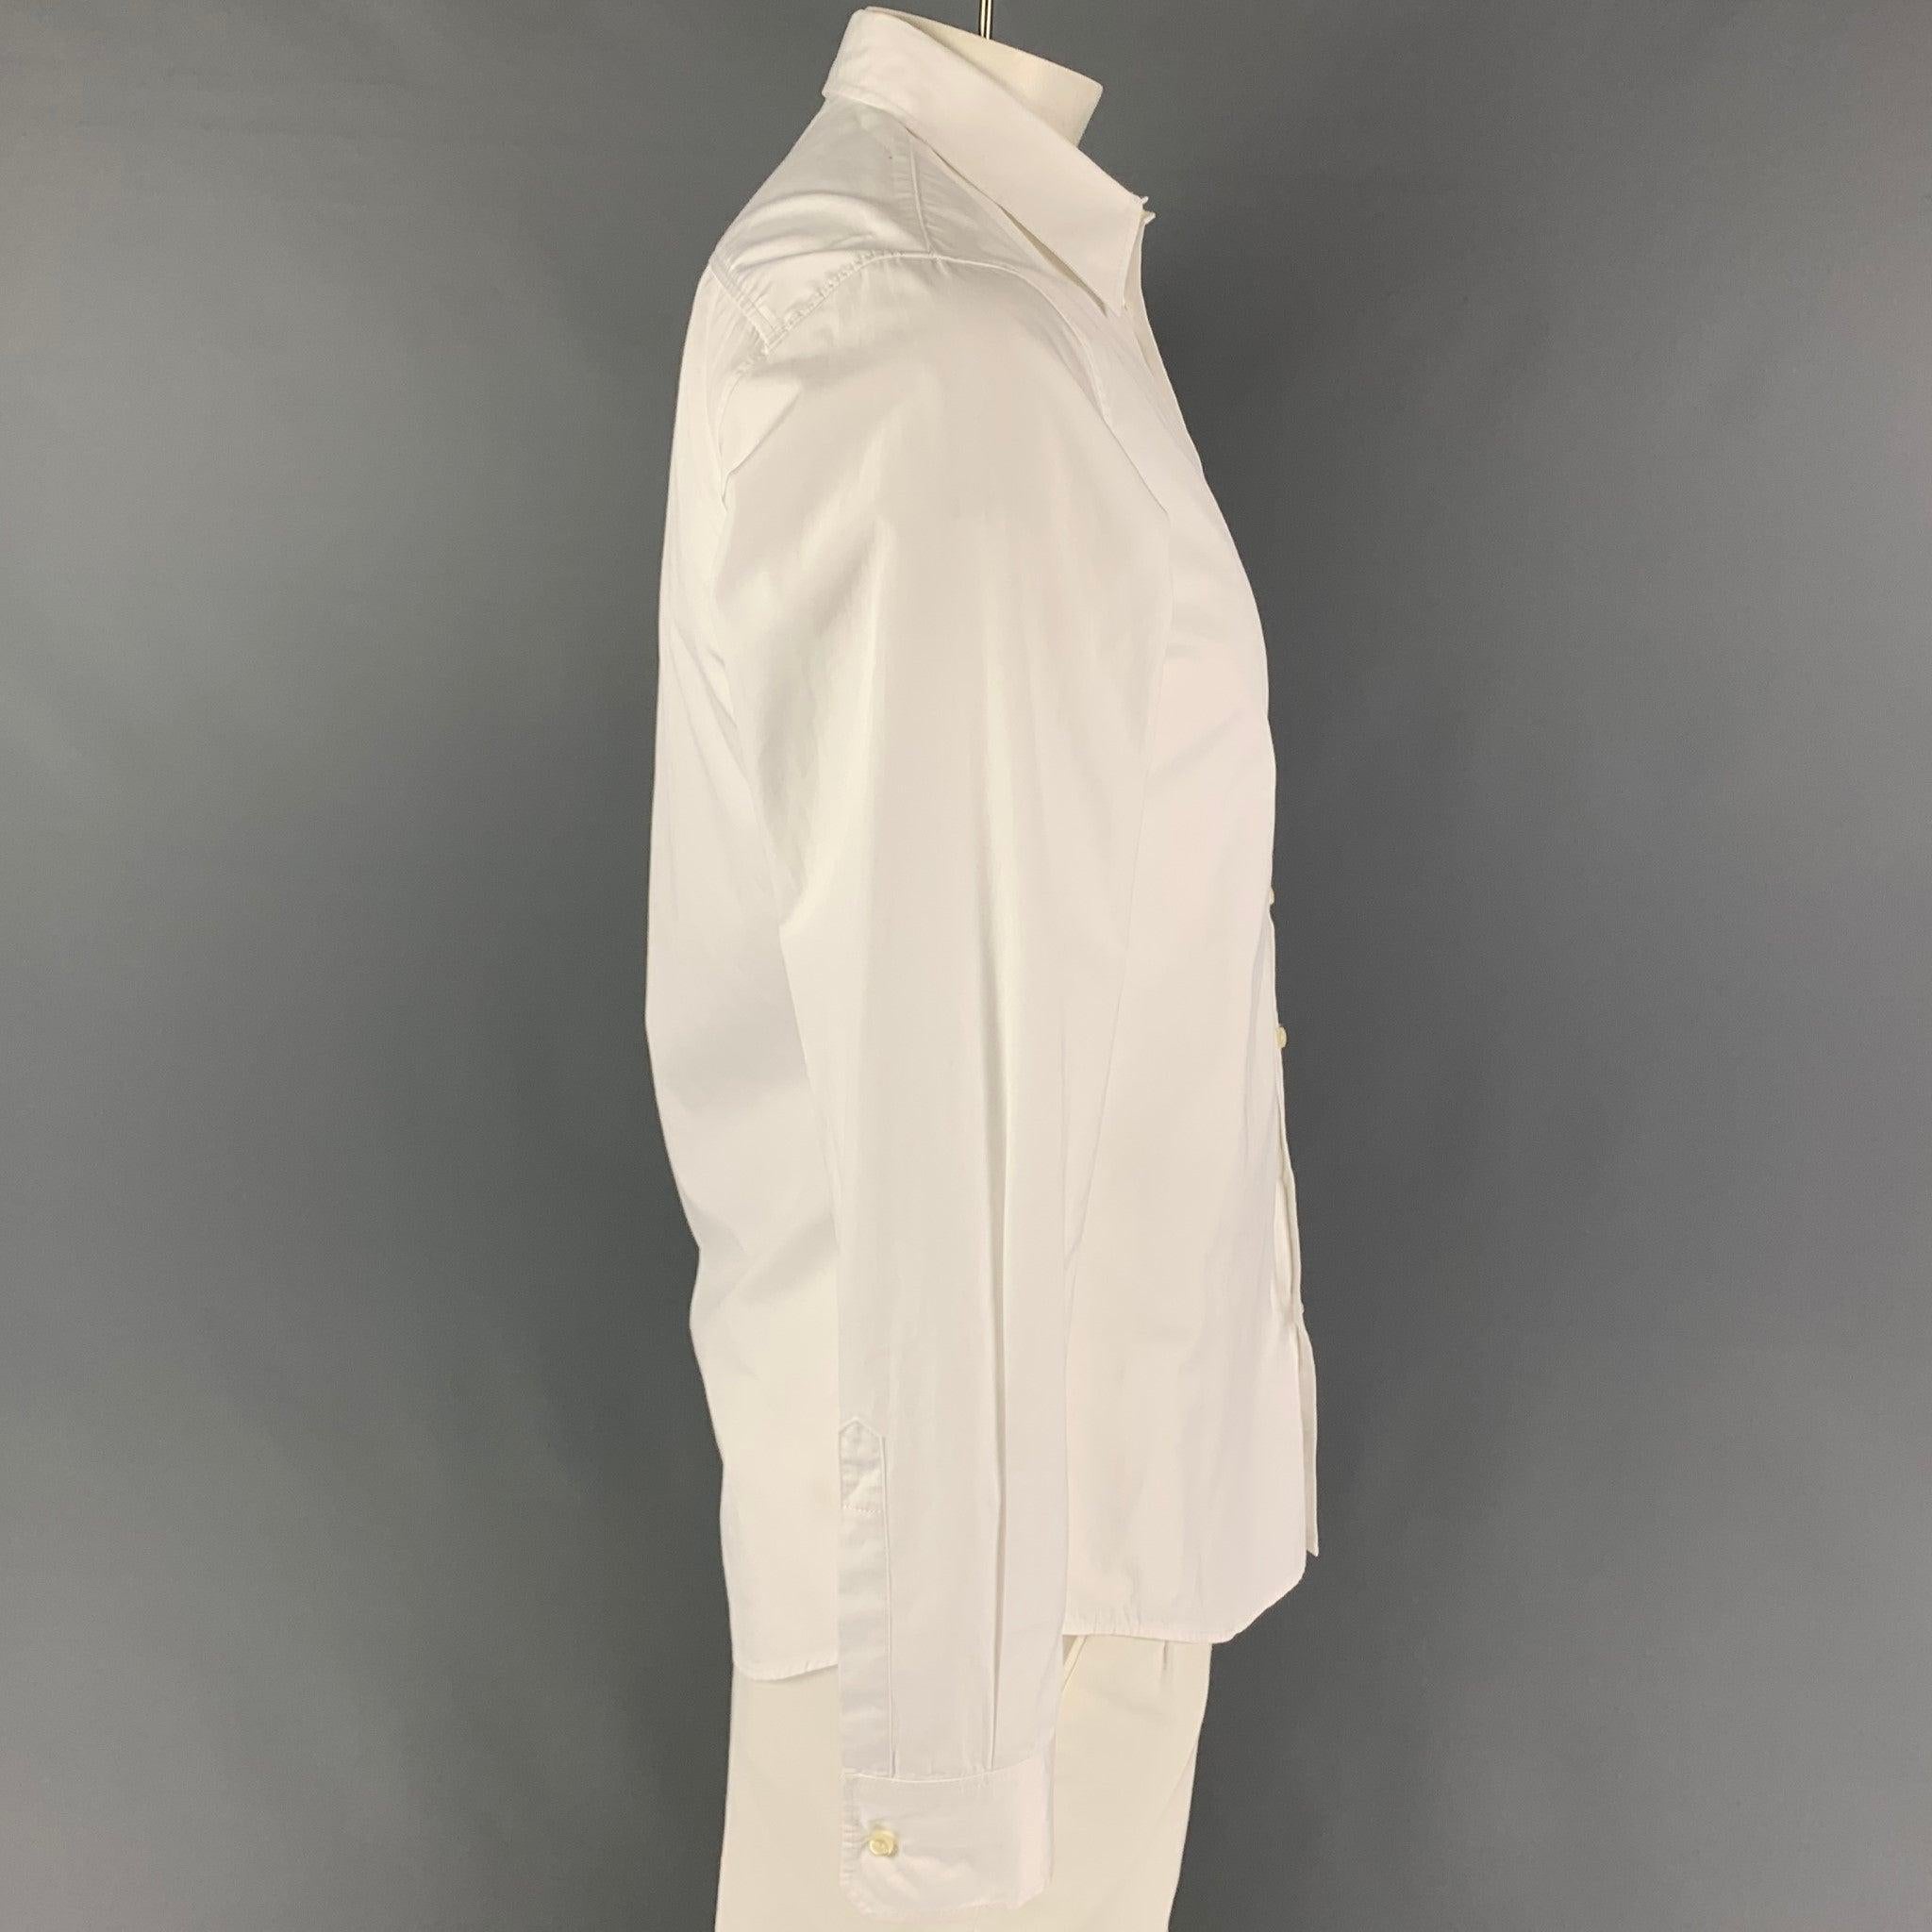 DSQUARED2 long sleeve shirt comes in white cotton featuring a classic style, silver tone emblem logo detail, spread collar, and a button up closure. Made in Italy.
Very Good
Pre-Owned Condition. 

Marked:   52 

Measurements: 
 
Shoulder: 17 inches 